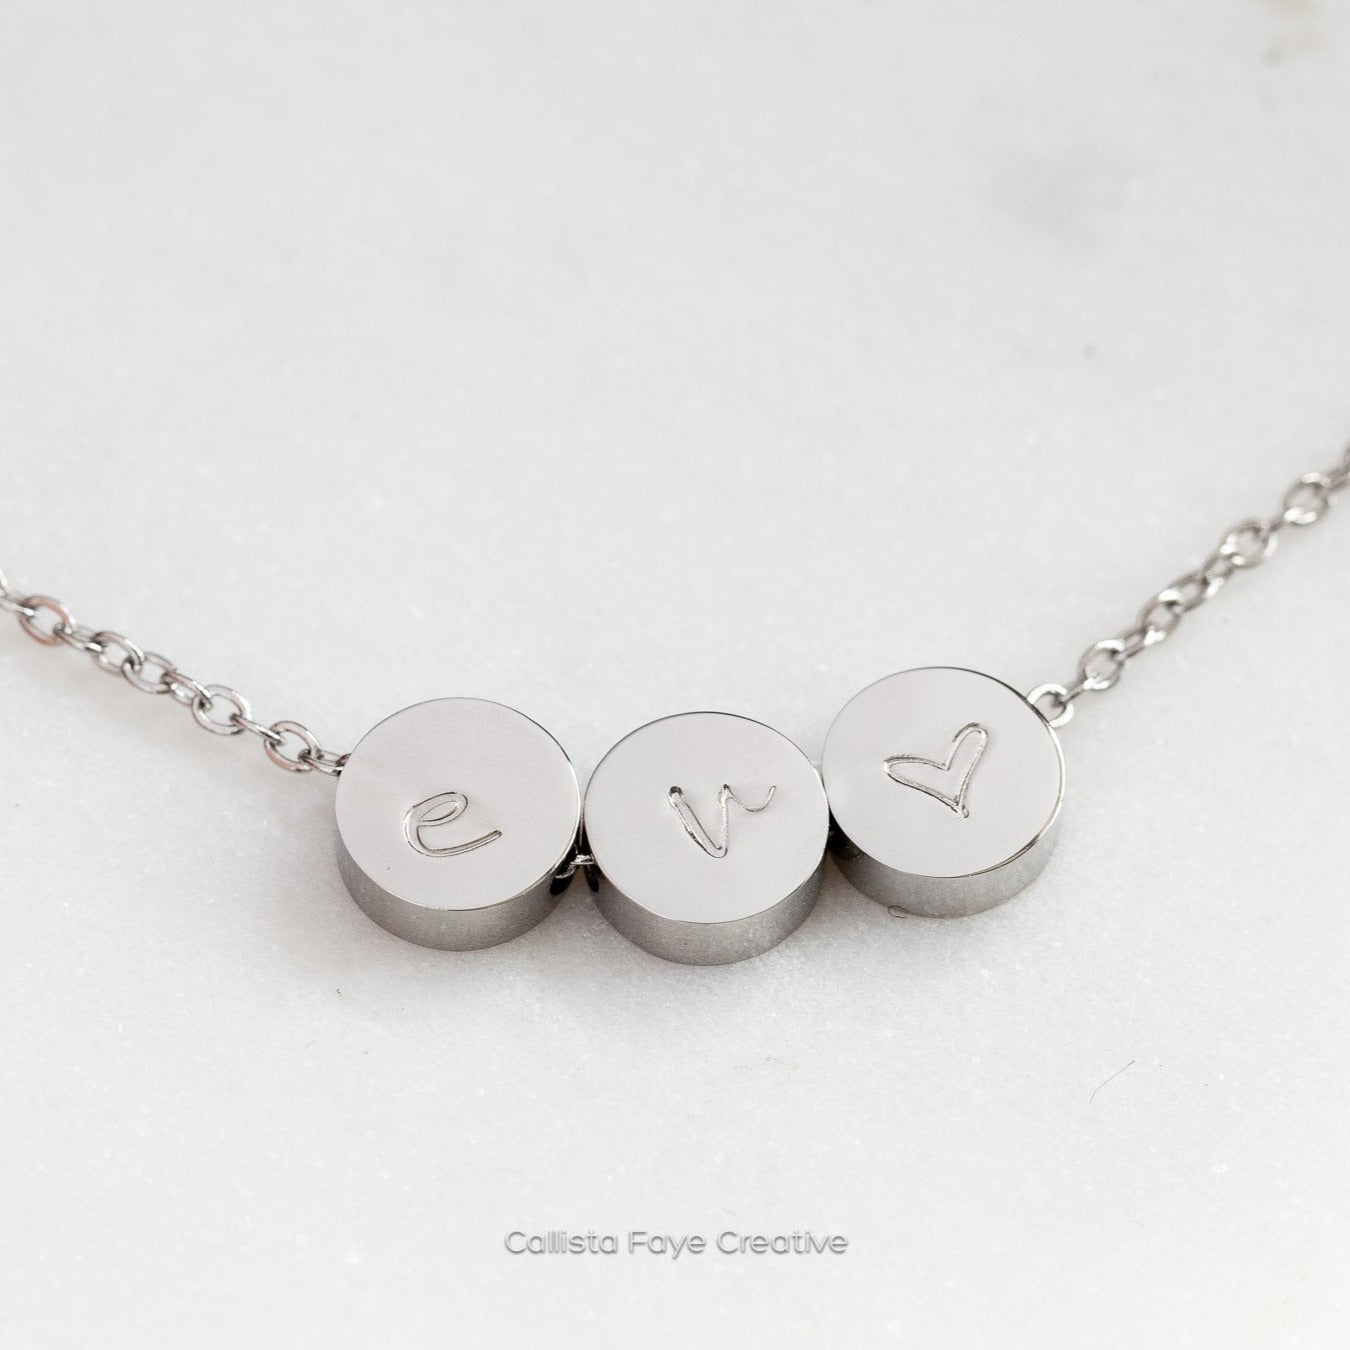 Custom Initial / Birth Flower Mini Coin BEAD Necklace, Personalized Necklaces callistafaye 3 Beads Silver 